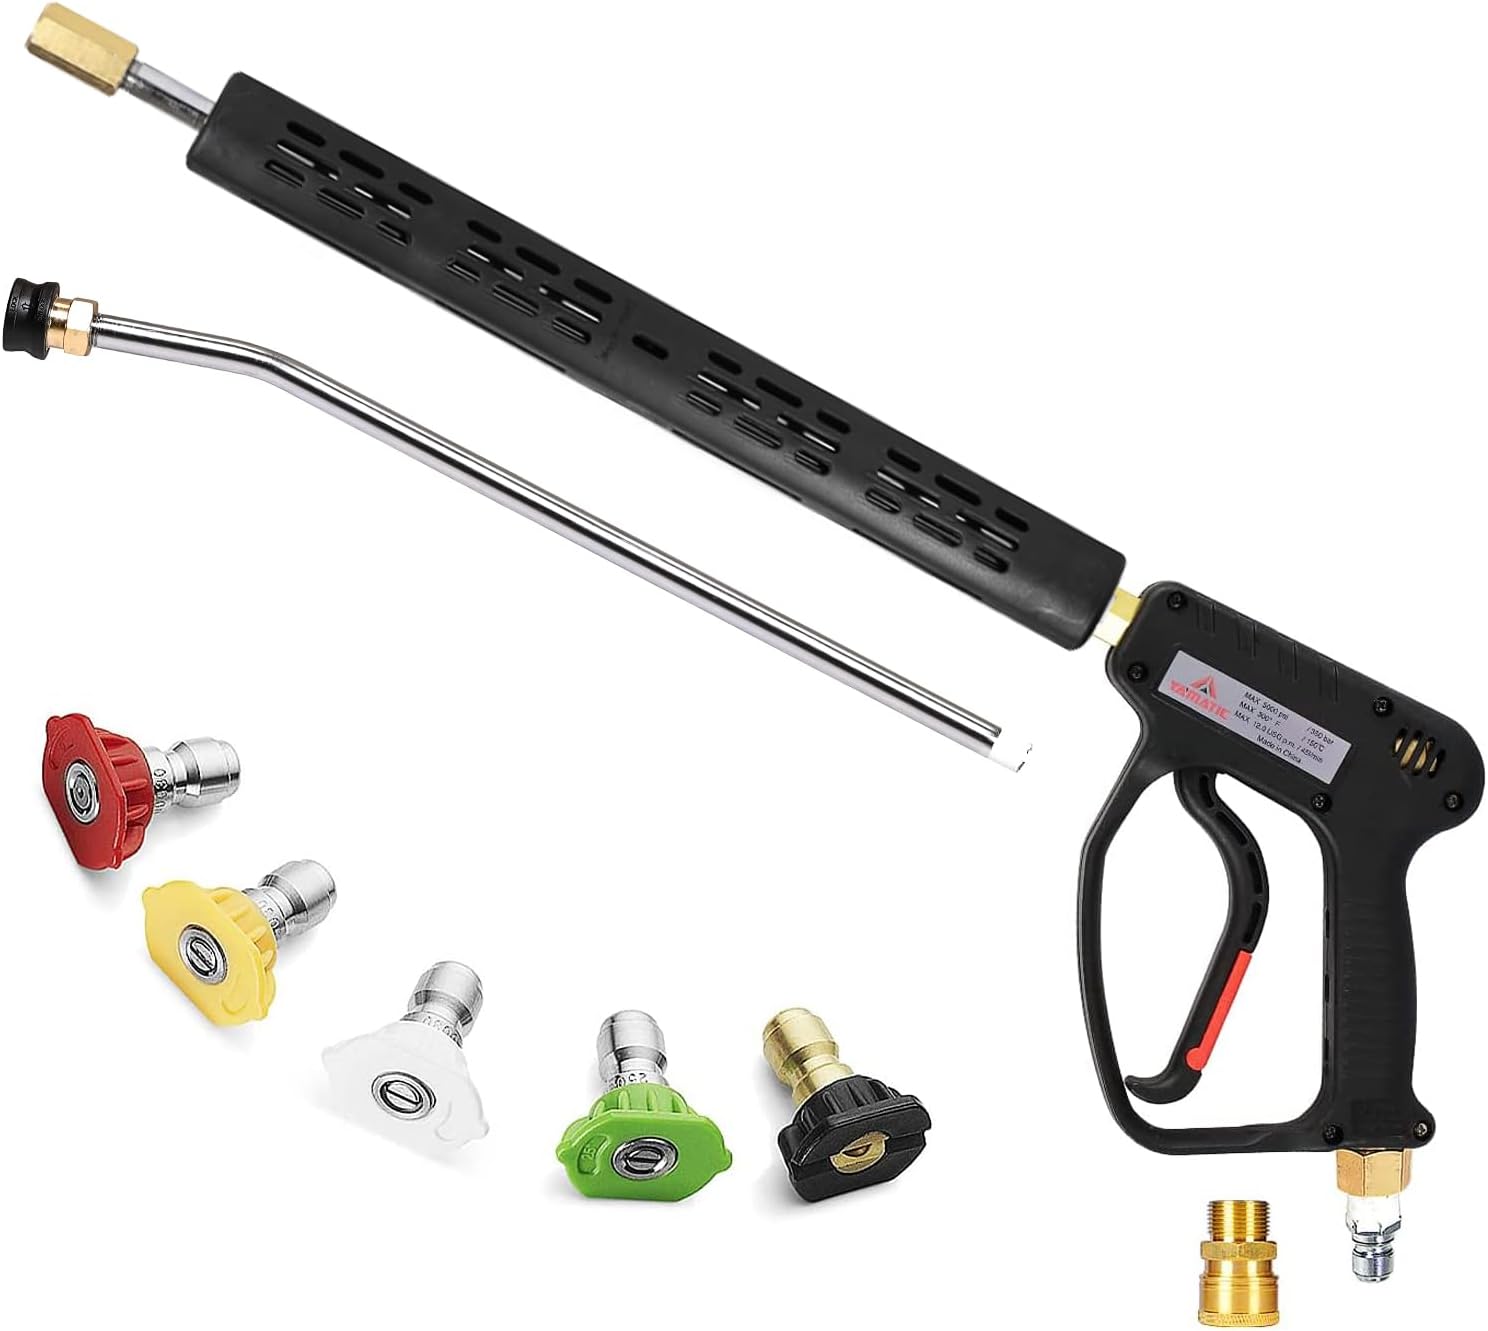 YAMATIC Pressure Washer Gun with Swivel, 5000 PSI Power Washer Wand Extension Replacement Handle with 3/8 Plug & M22-14mm Male Inlet, 1/4 Quick Connect Outlet for Foam Cannon Car Wash